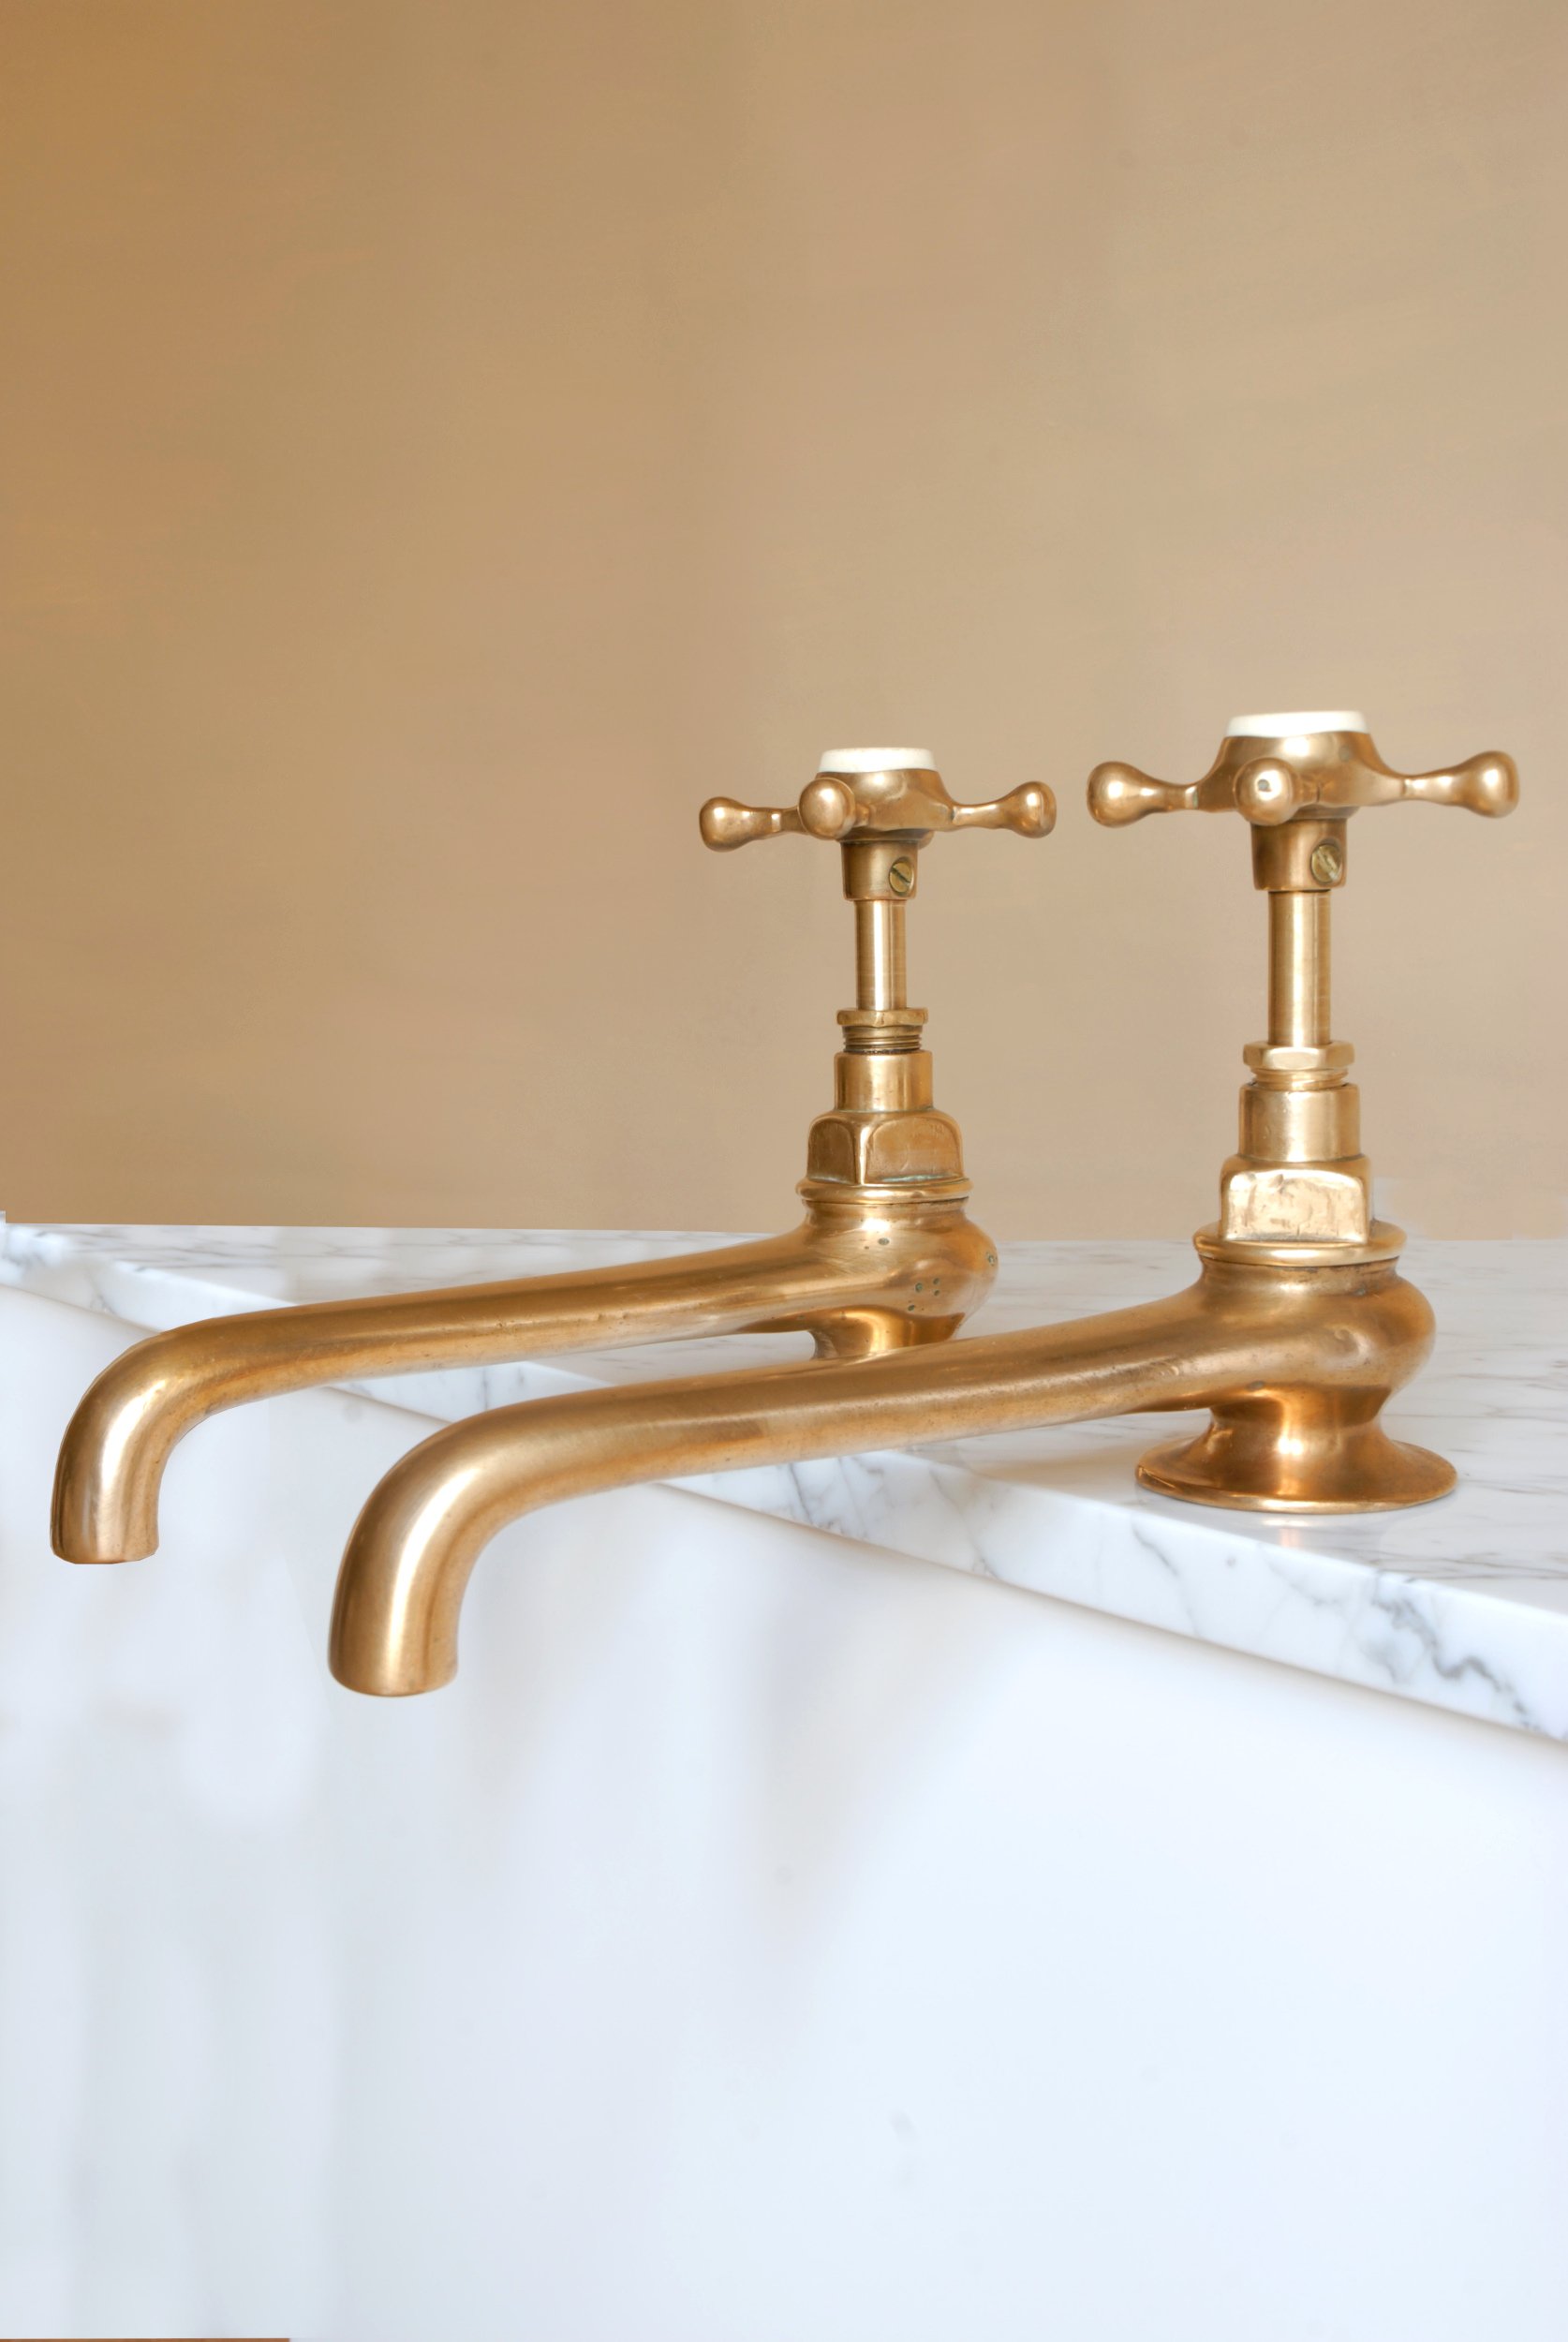 Antique Long Reach Bath Taps — Water and Wood